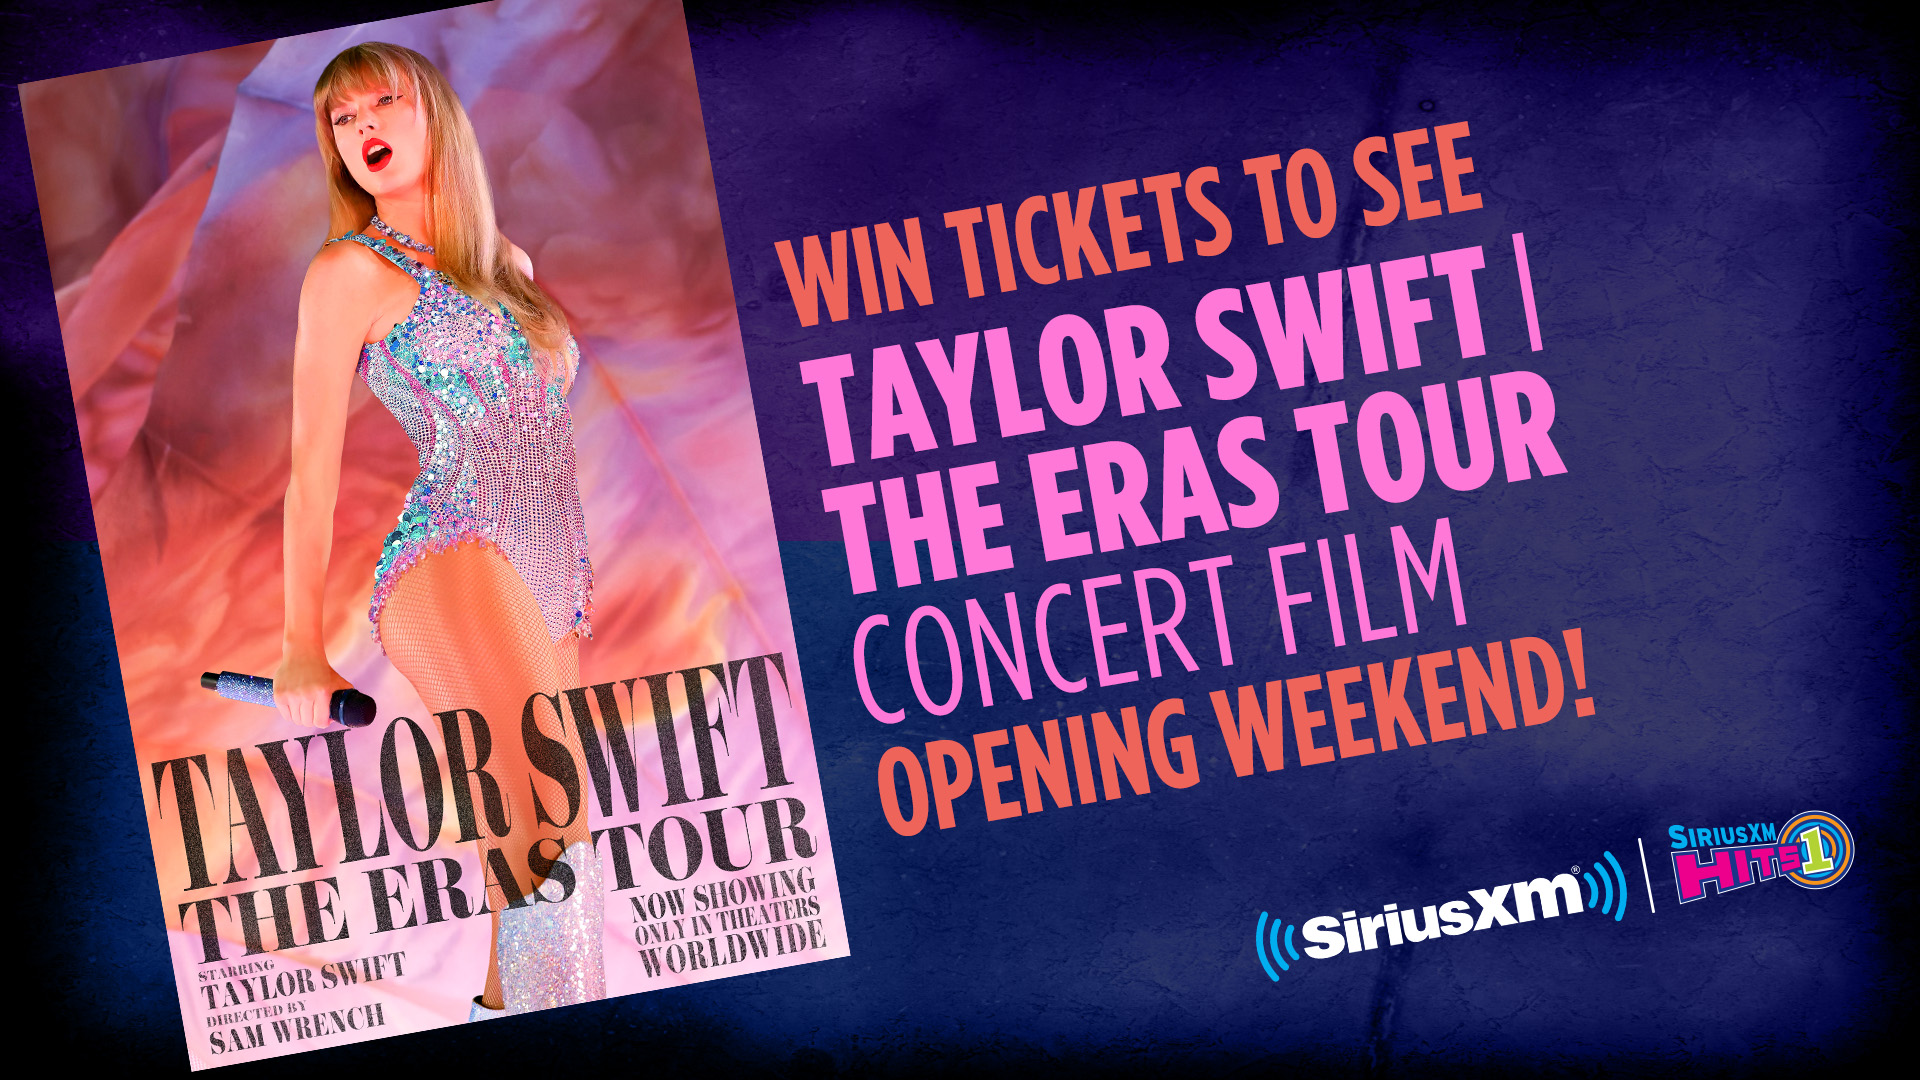 Win tickets to see Taylor Swift | The Eras Tour Concert Film opening weekend with SiriusXM Hits 1